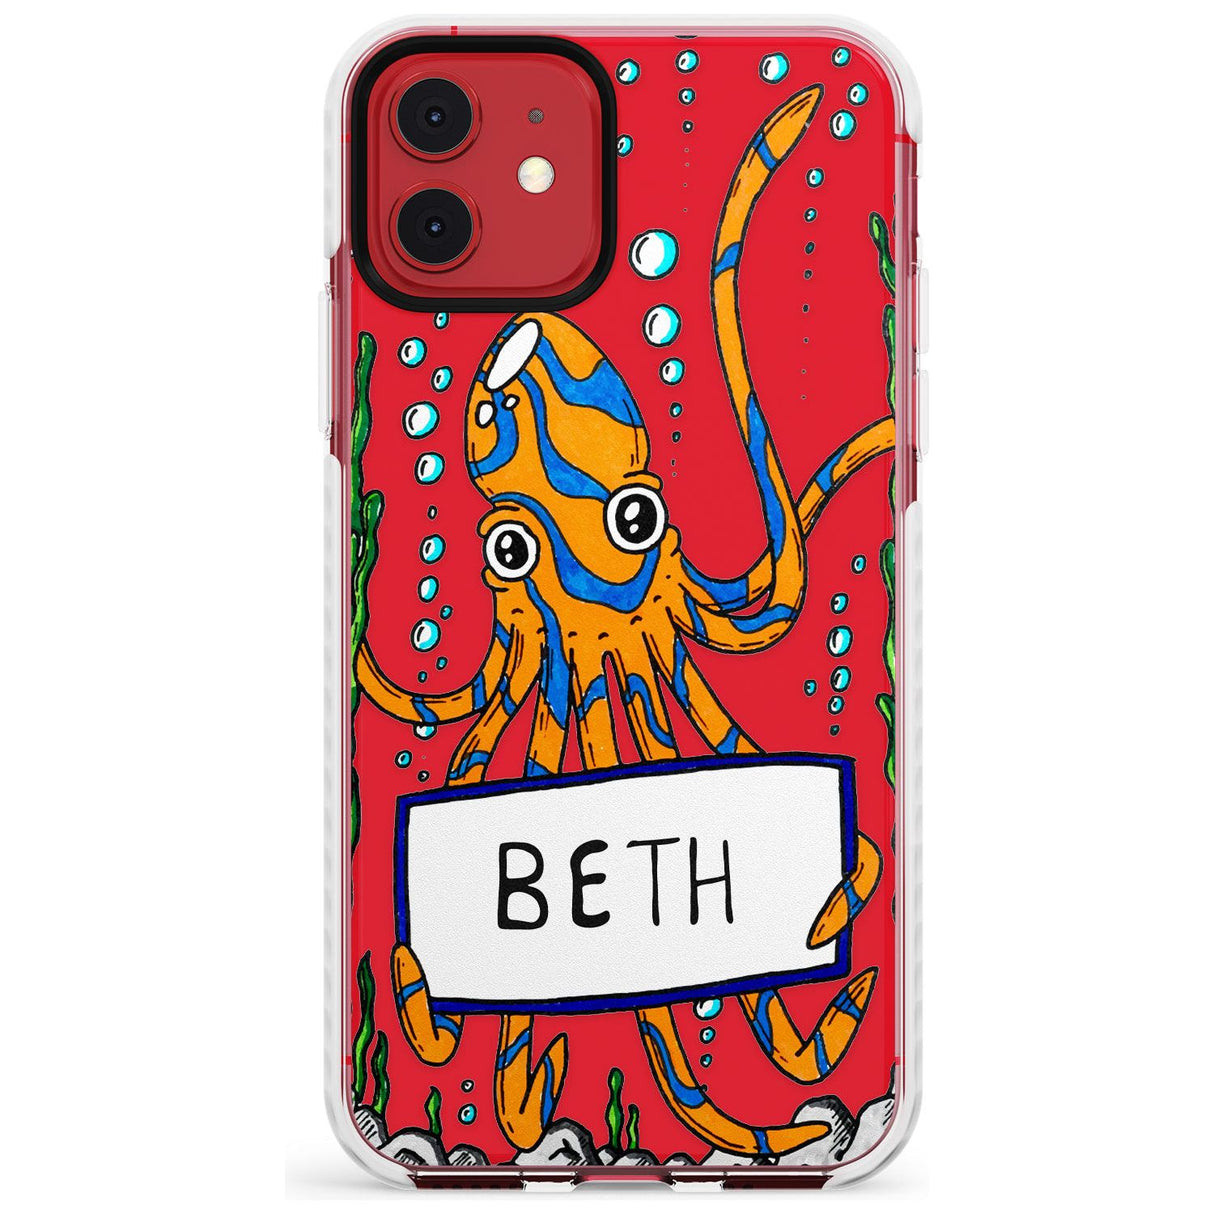 Personalised Custom Octo Impact Phone Case for iPhone 11